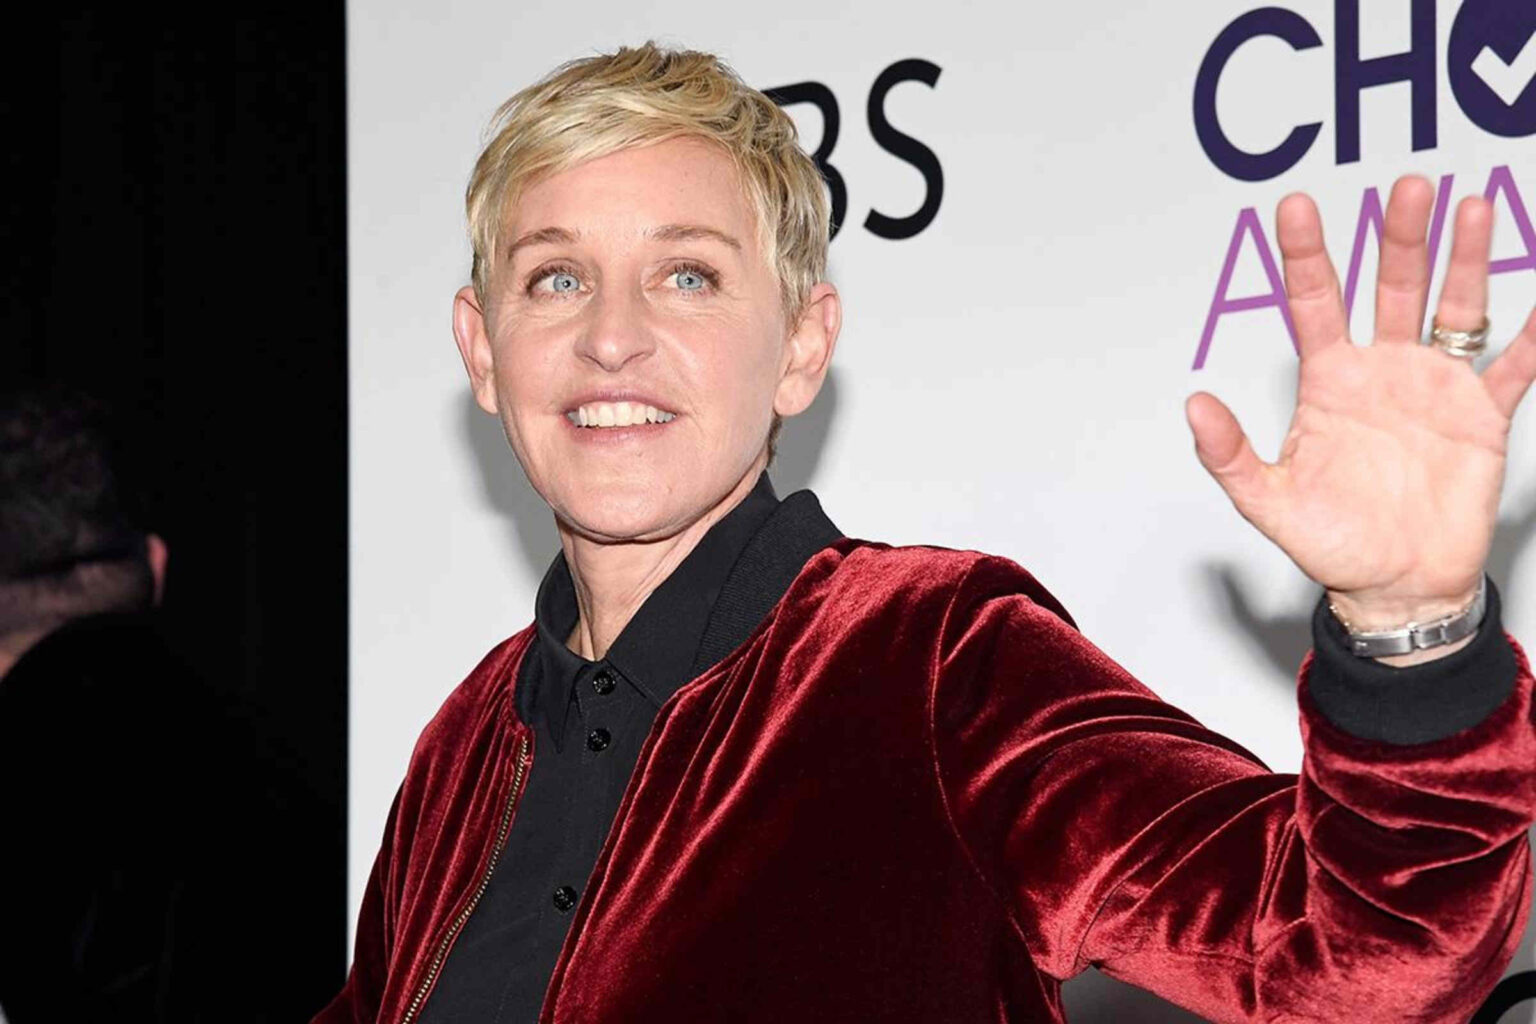 Ellen DeGeneres's "nice" image takes another hit. Find out which celebrities have exposed the talk show host for being mean.